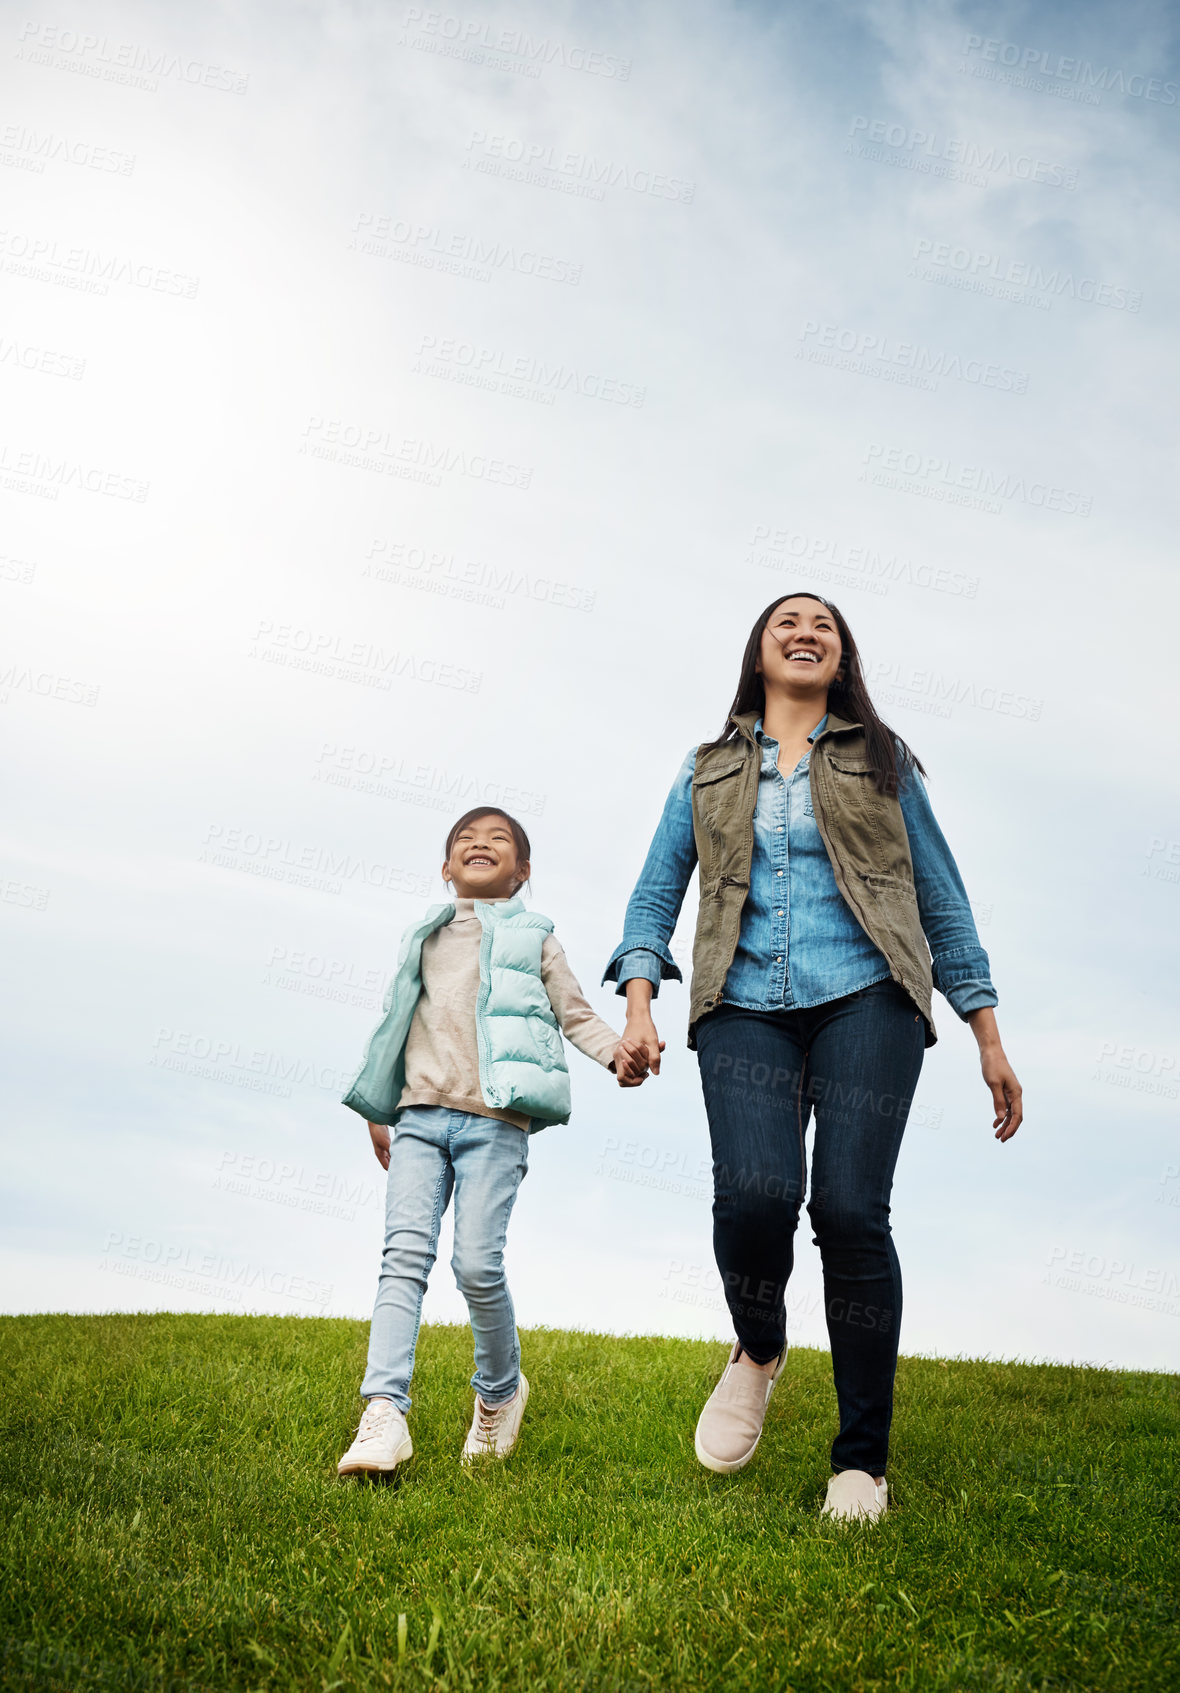 Buy stock photo Shot of a woman holding her little girl's hand as they walk outdoors